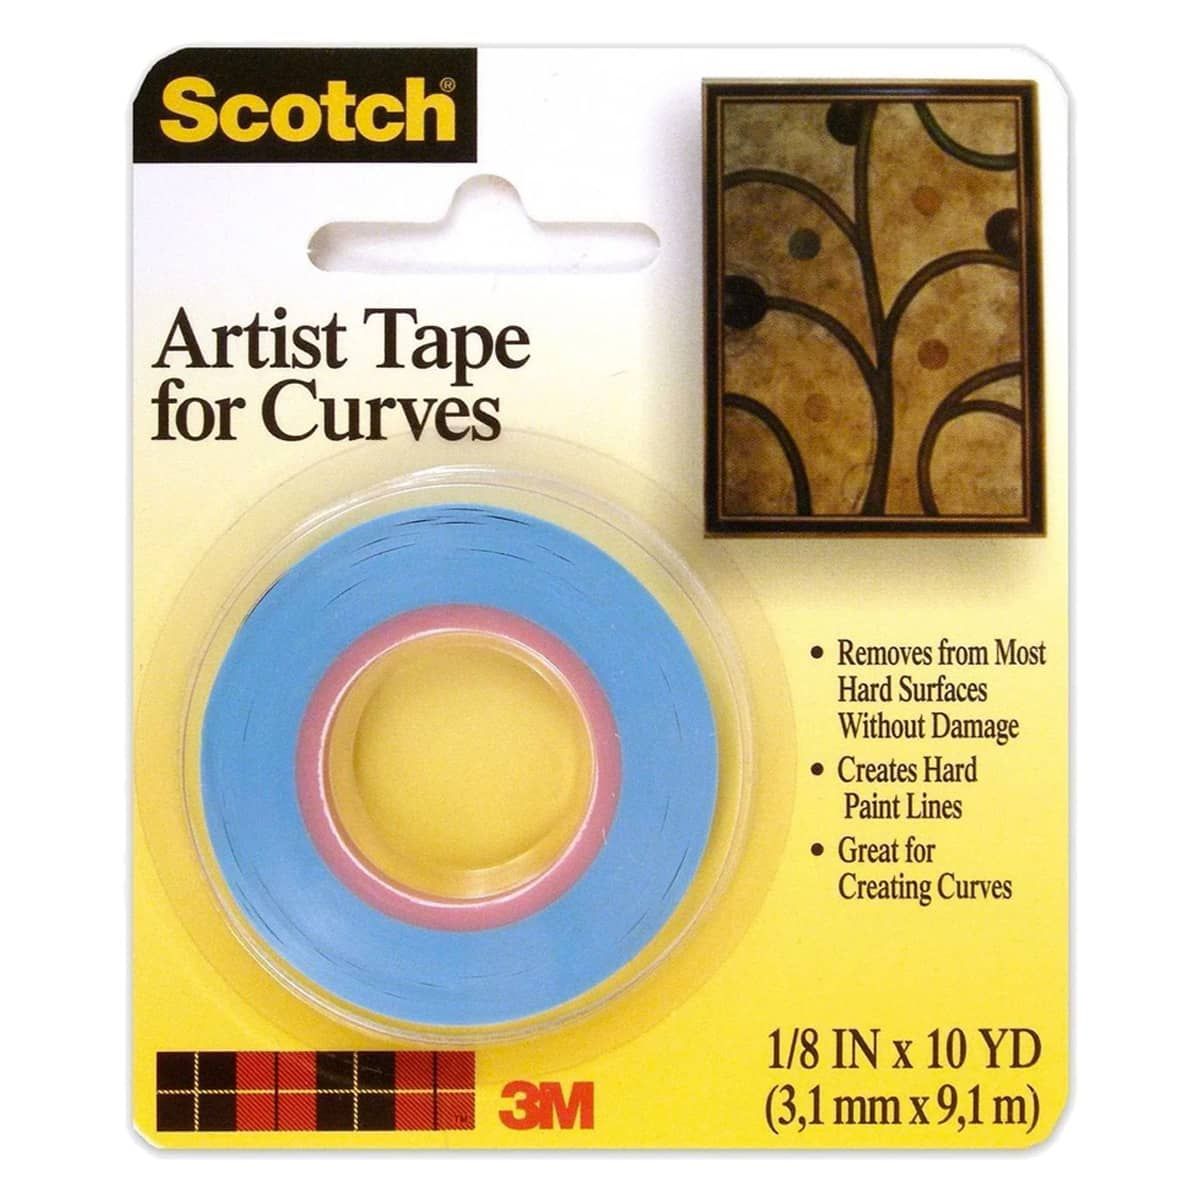 3M Artist Tape for Curves, 1/8" x 10 Yard Roll